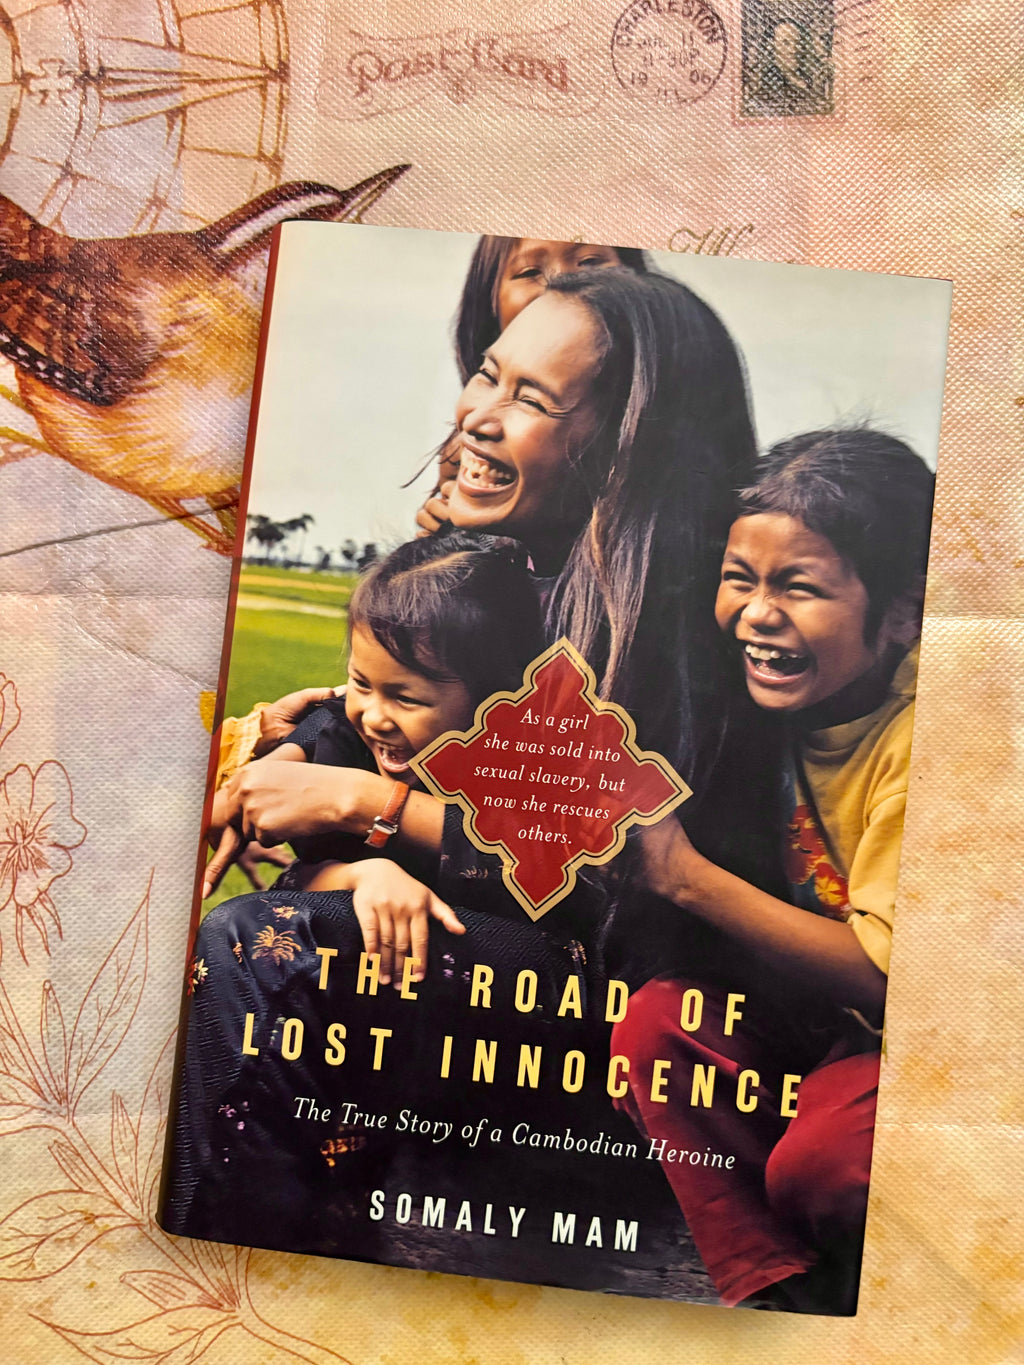 The Road of Lost Innocence: A True Story of a Cambodian Heroine- By Somaly Mam